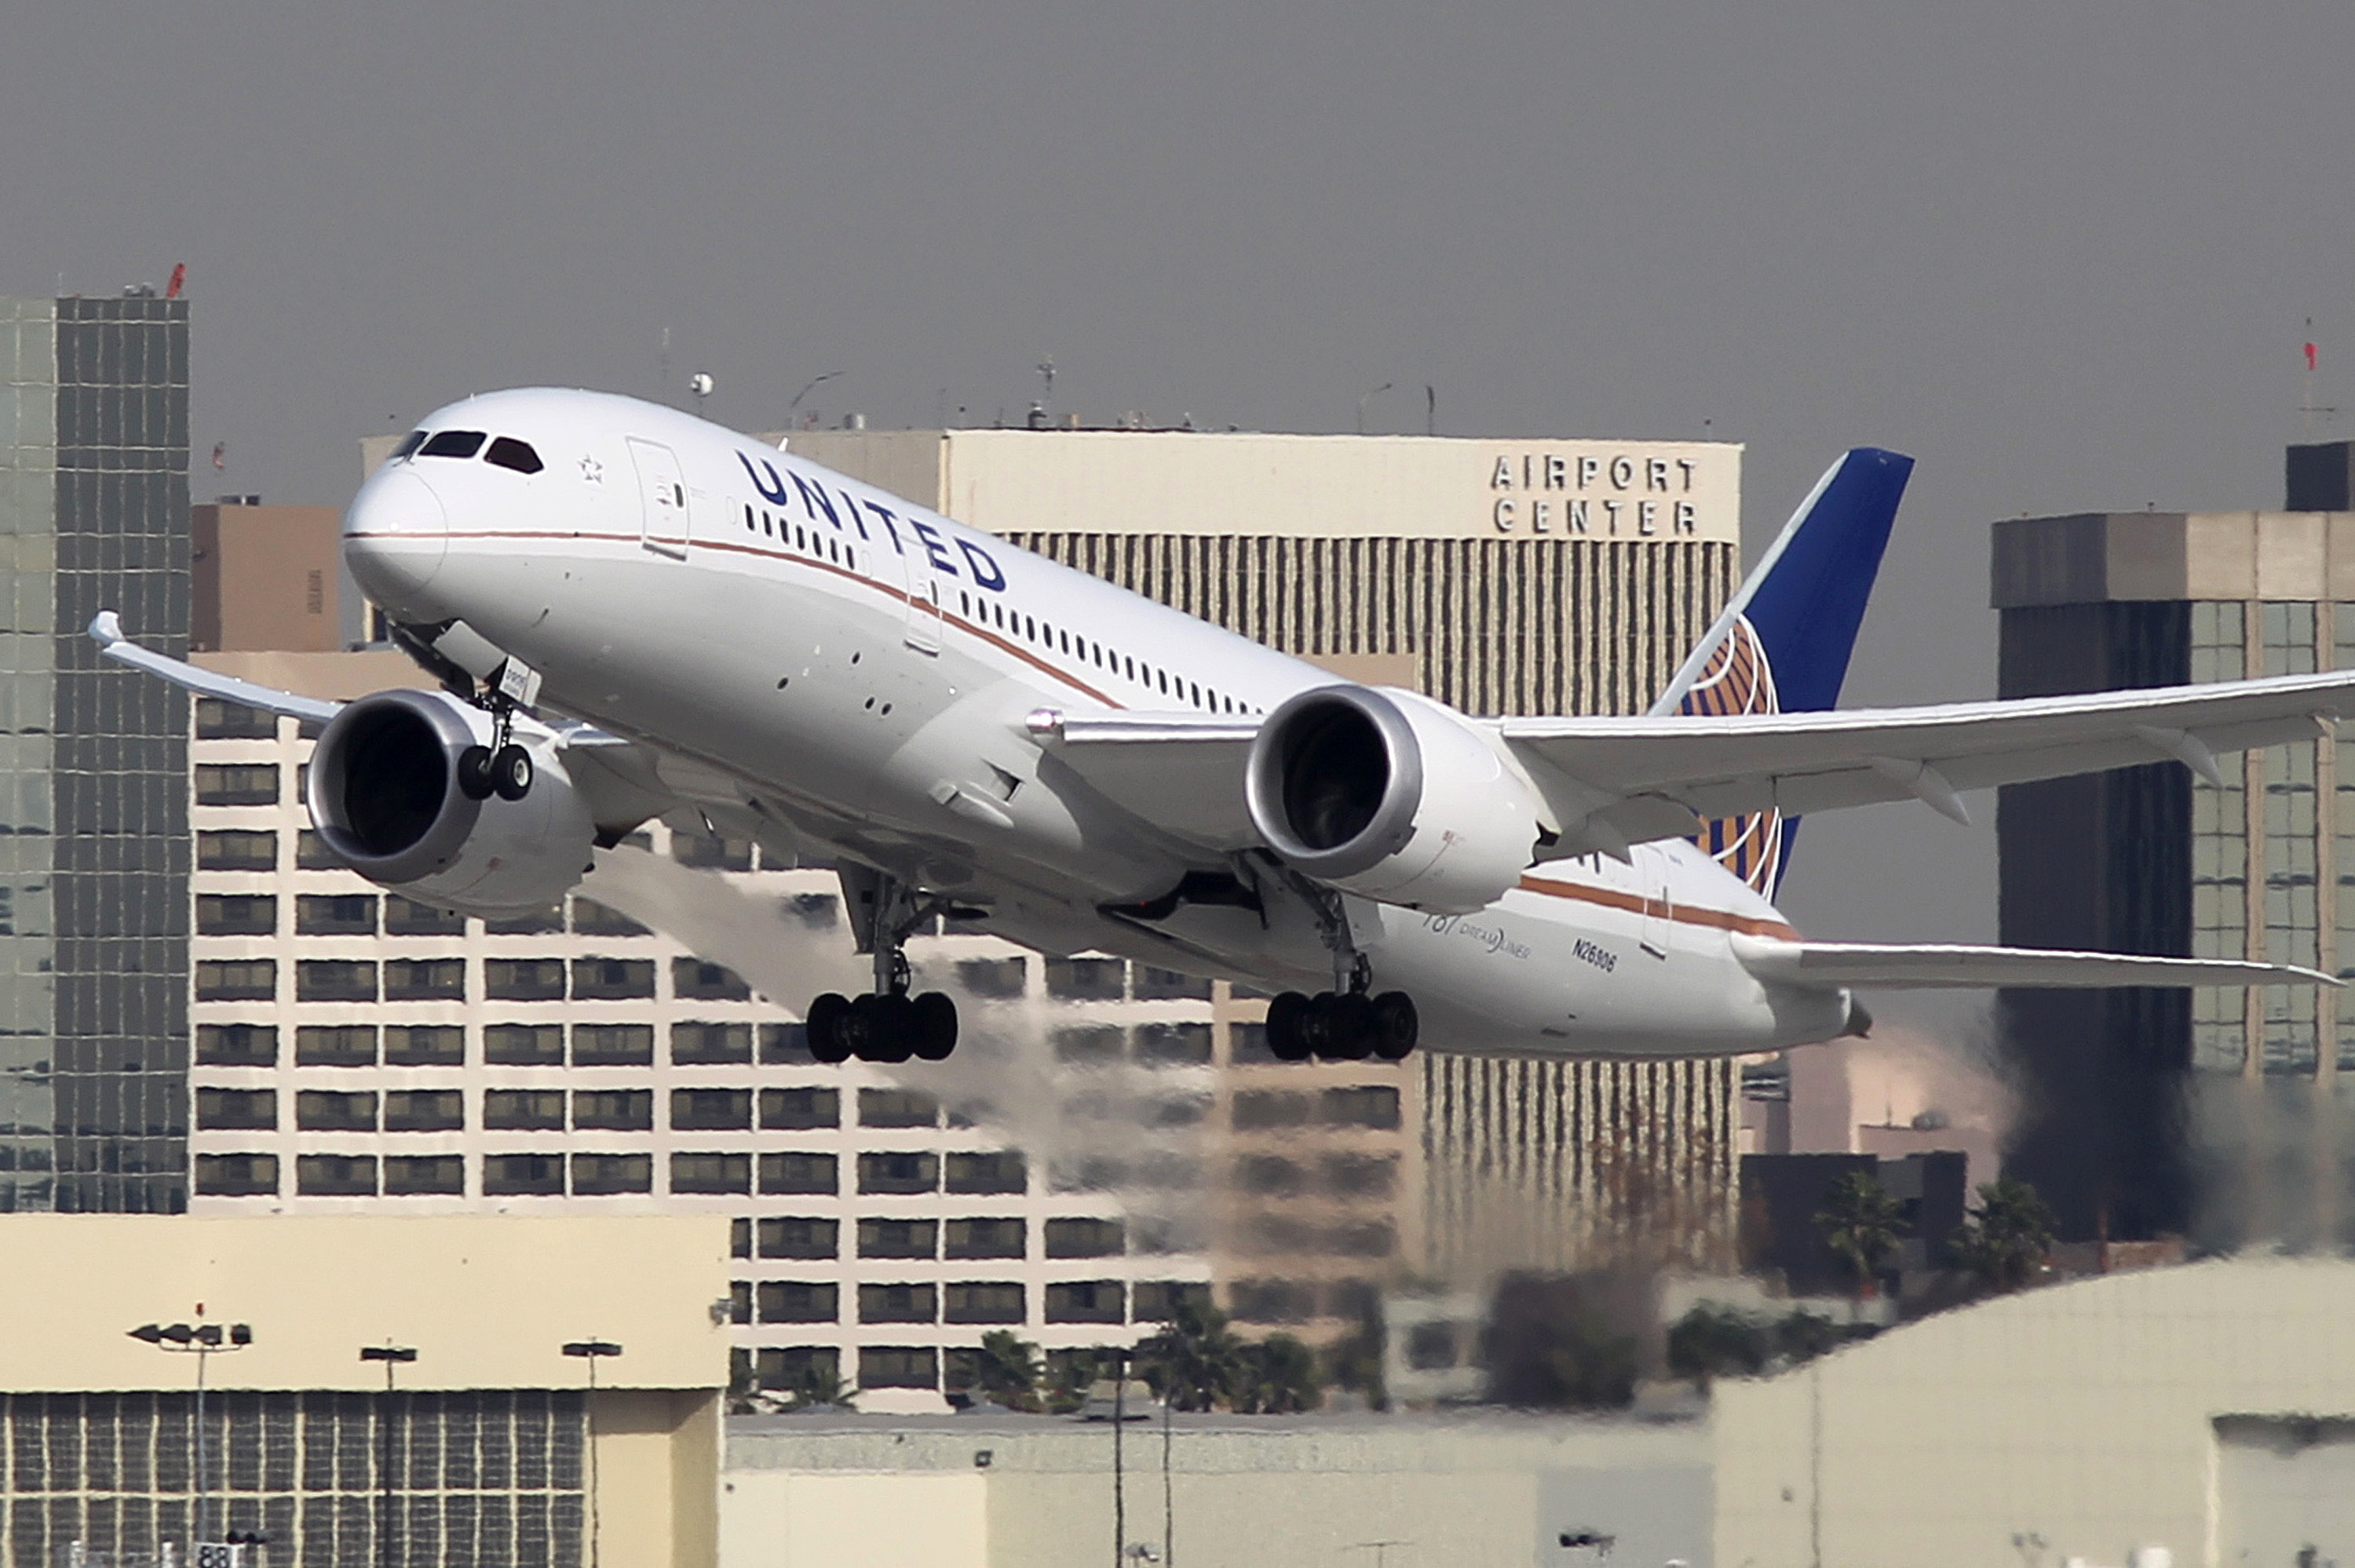 A Boeing 787 Dreamliner operated by United Airlines takes off at Los Angeles International Airport (LAX) on January 9, 2013 in Los Angeles, California. (David McNew&mdash;Getty Images)